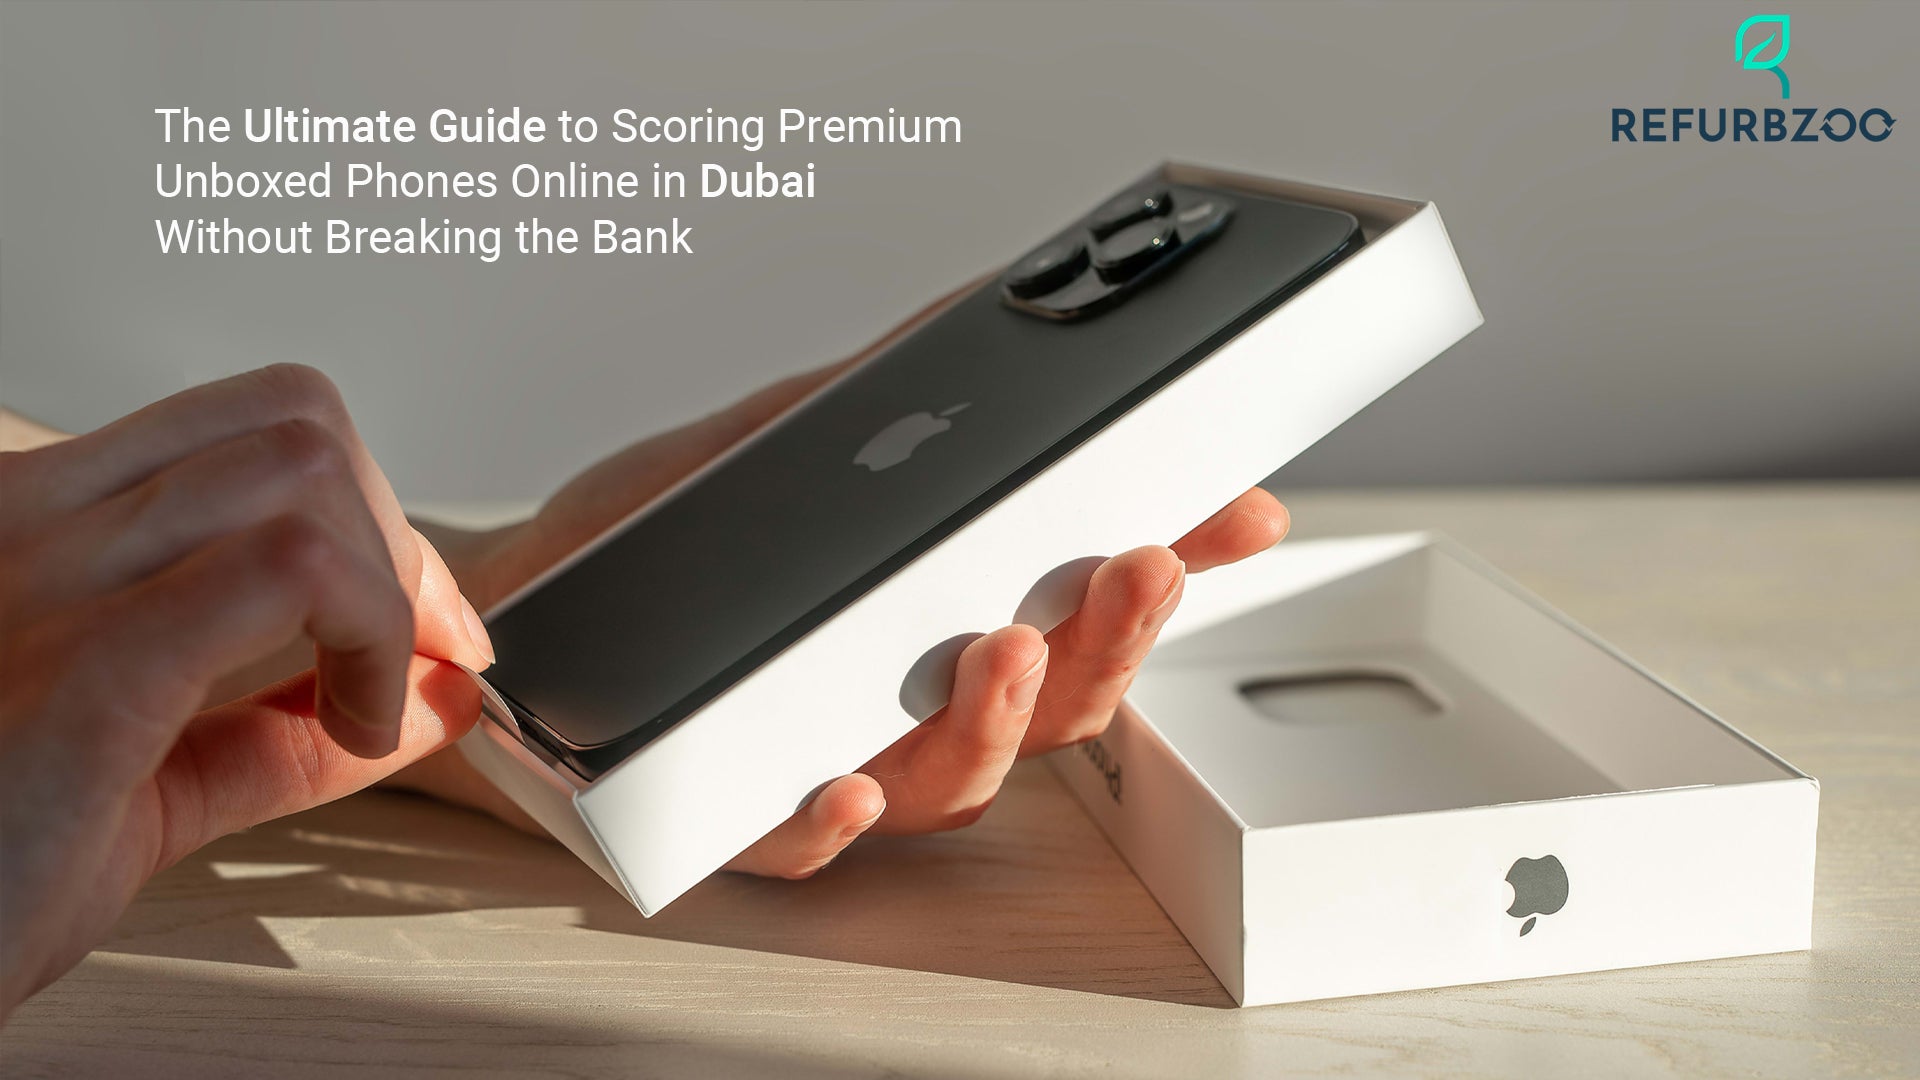 The Ultimate Guide to Scoring Premium Unboxed Phones Online in Dubai Without Breaking the Bank